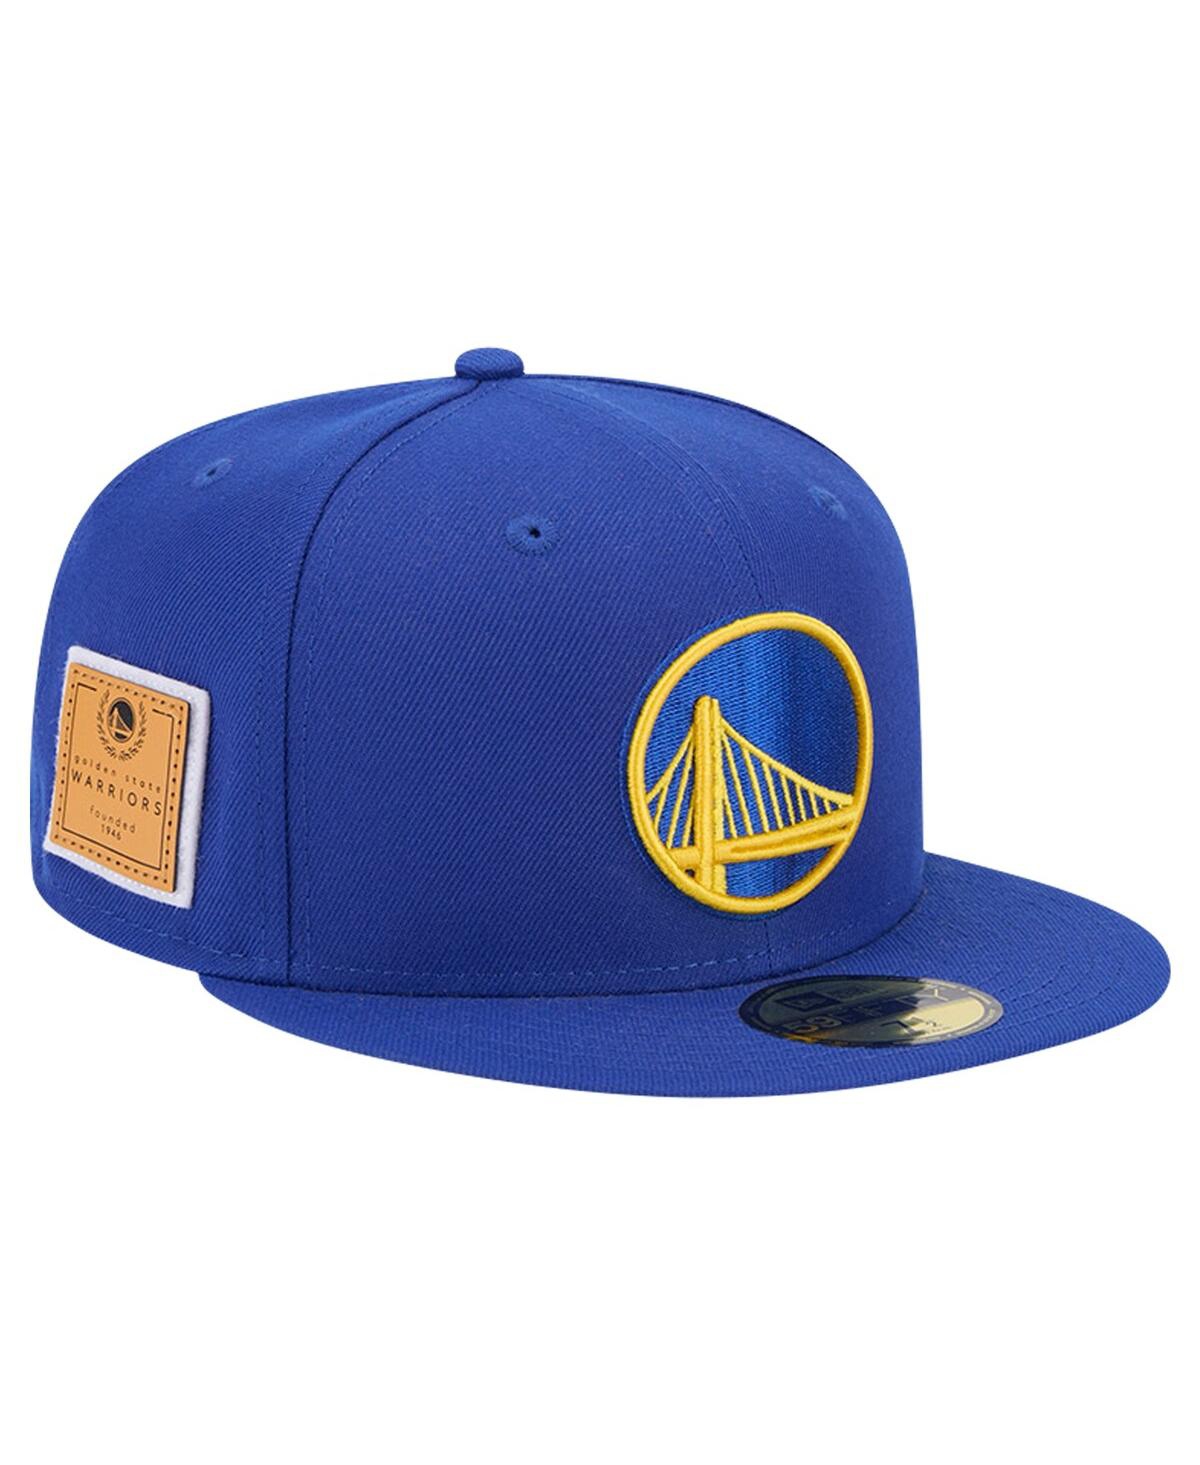 Men's Royal Golden State Warriors Court Sport Leather Applique 59Fifty Fitted Hat - Royal